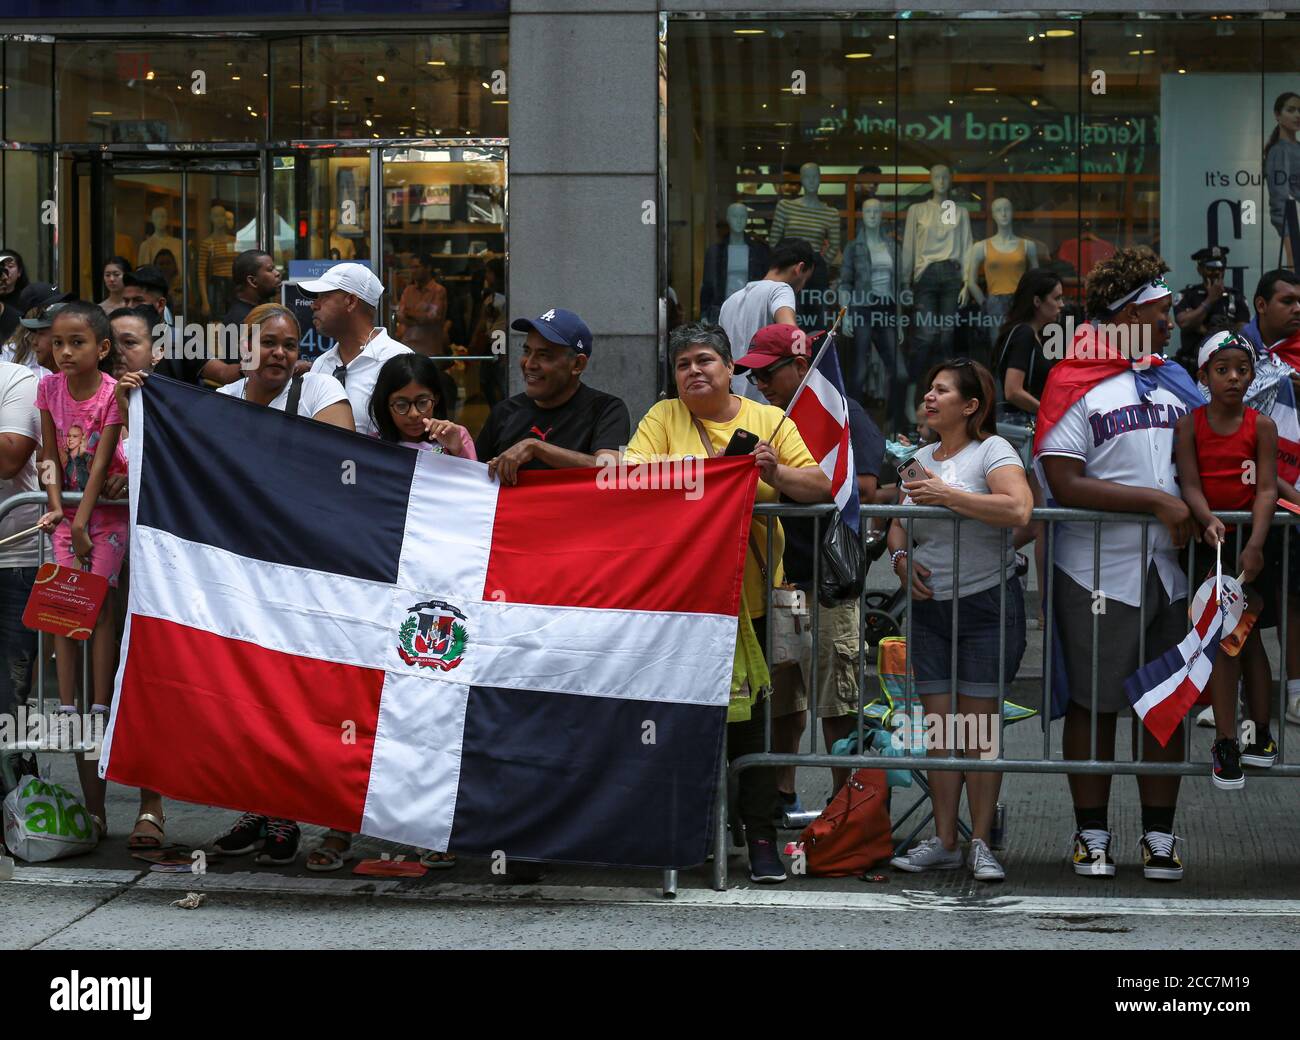 Dominican Day Parade in downtown New York City. Stock Photo